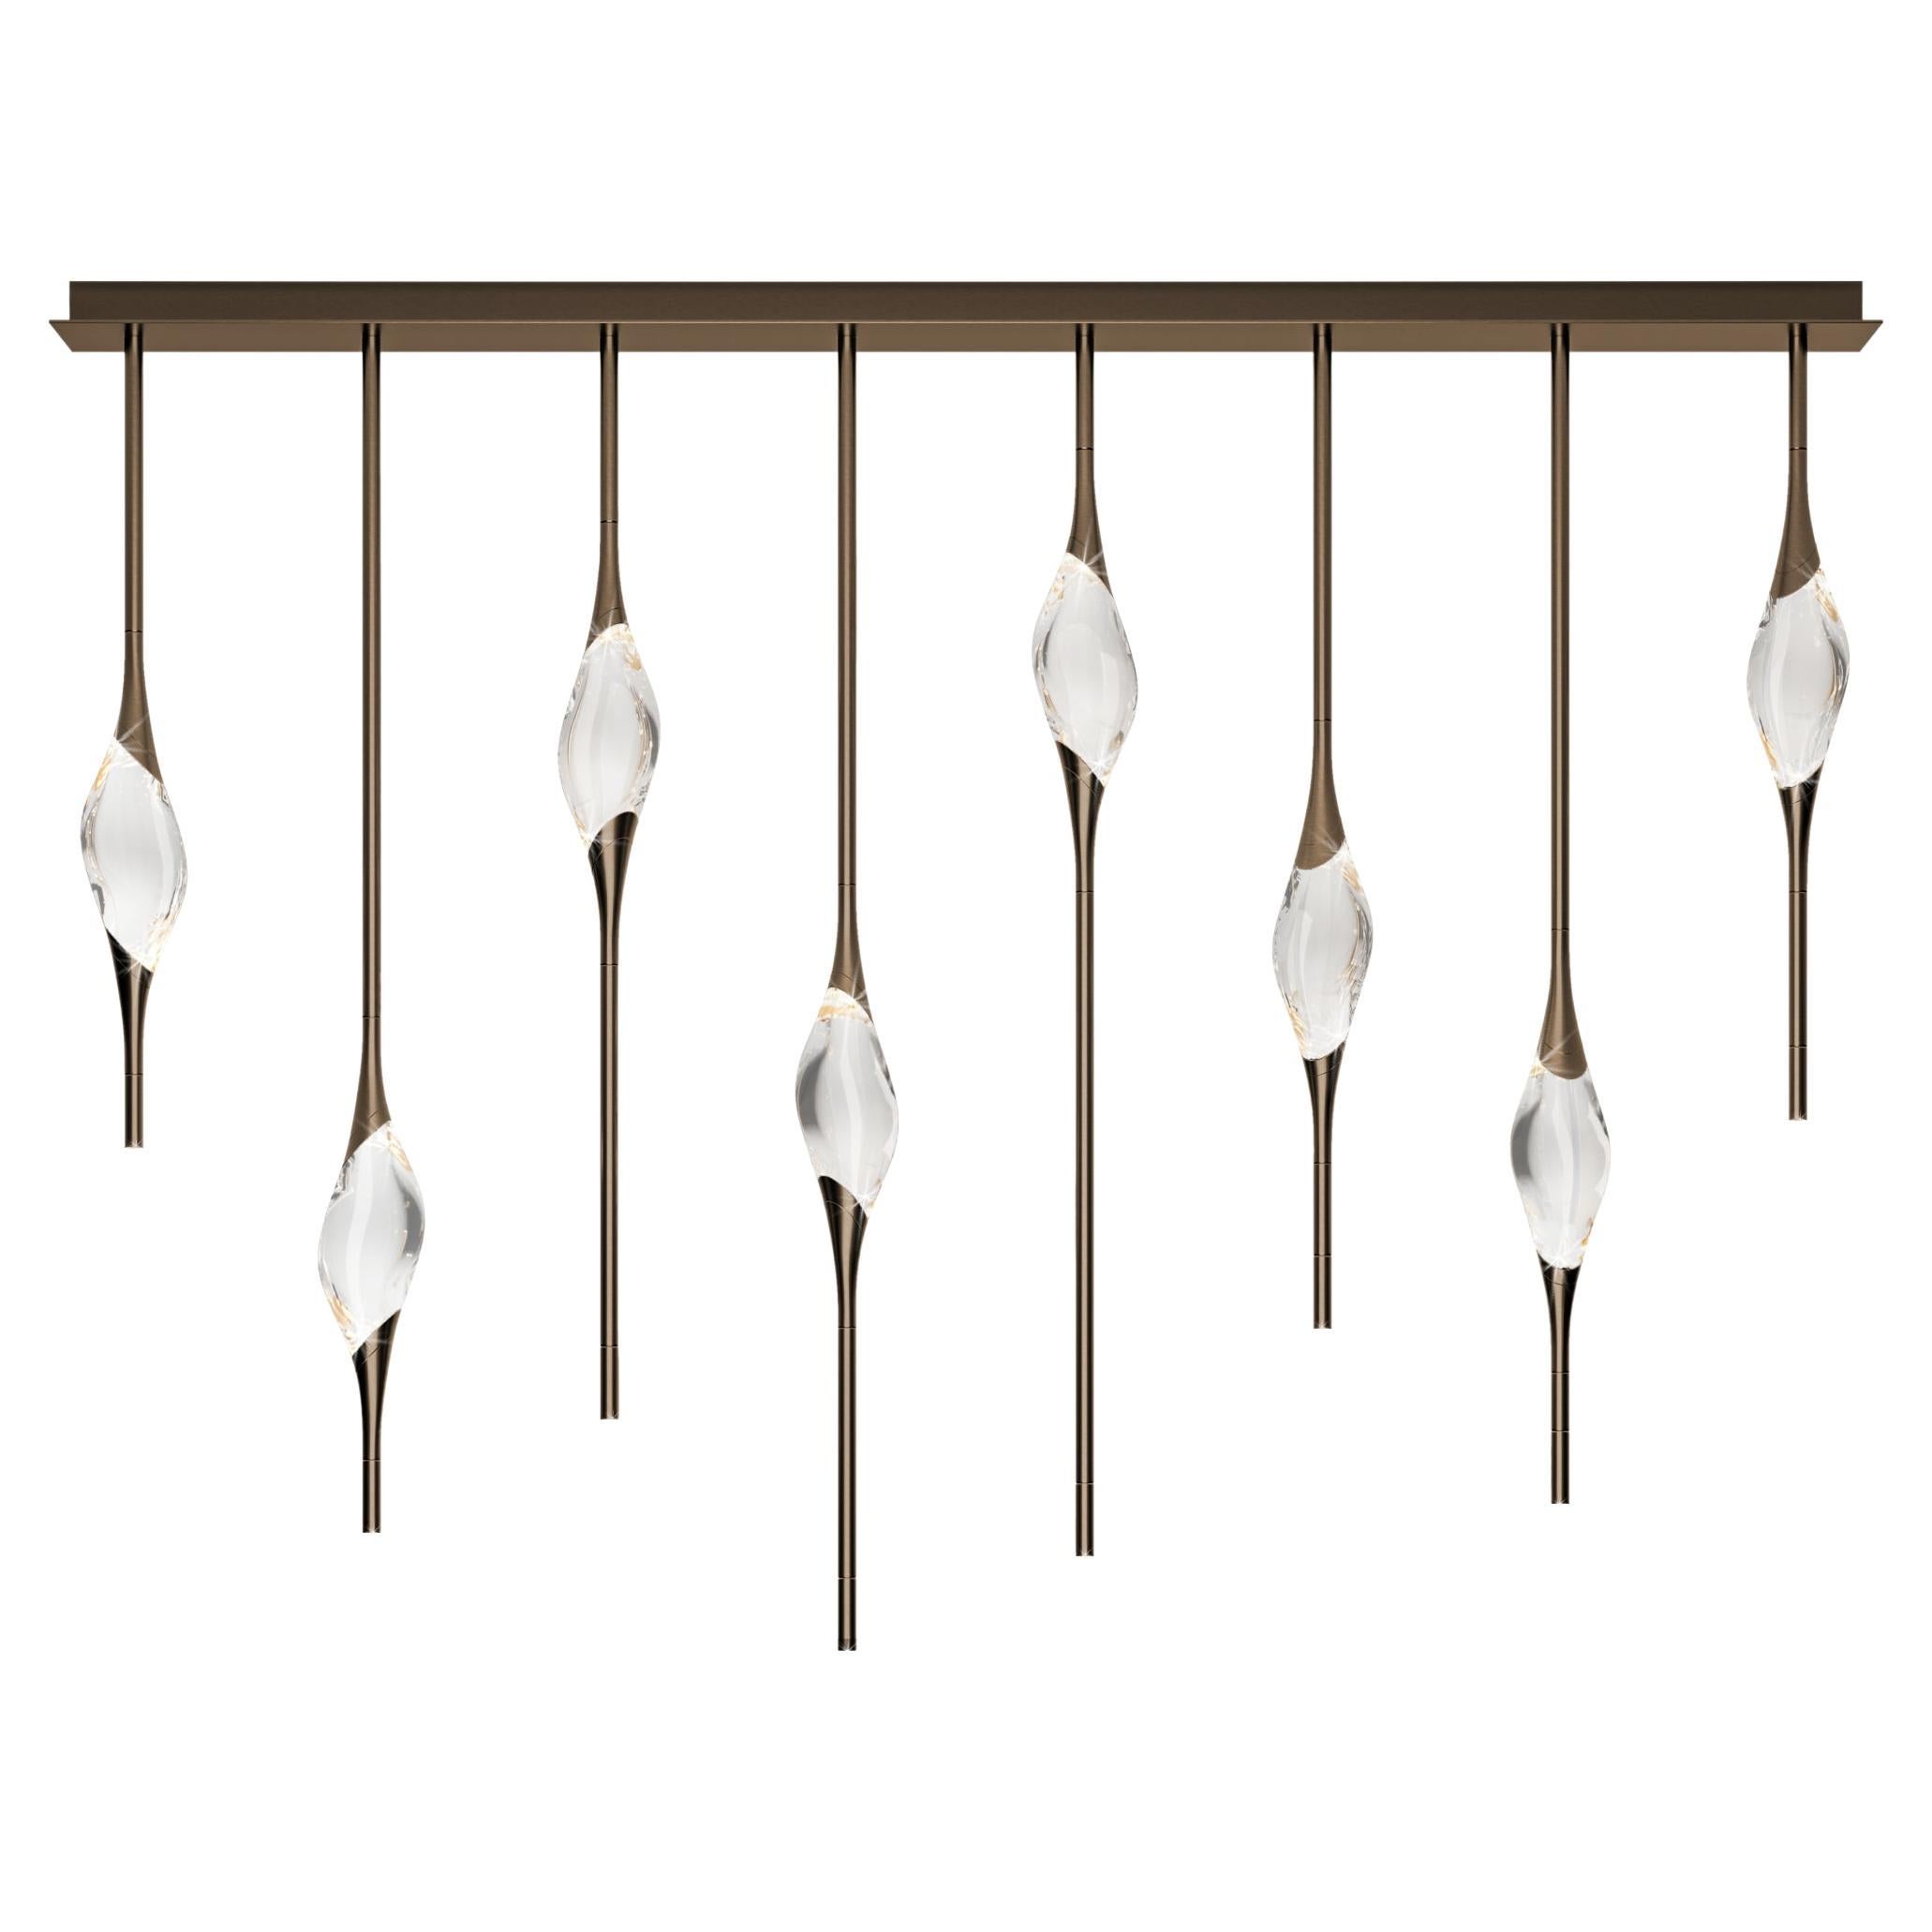 "Il Pezzo 12 Staggered Chandelier" - length 160cm/63” - bronze - crystal - LEDs For Sale